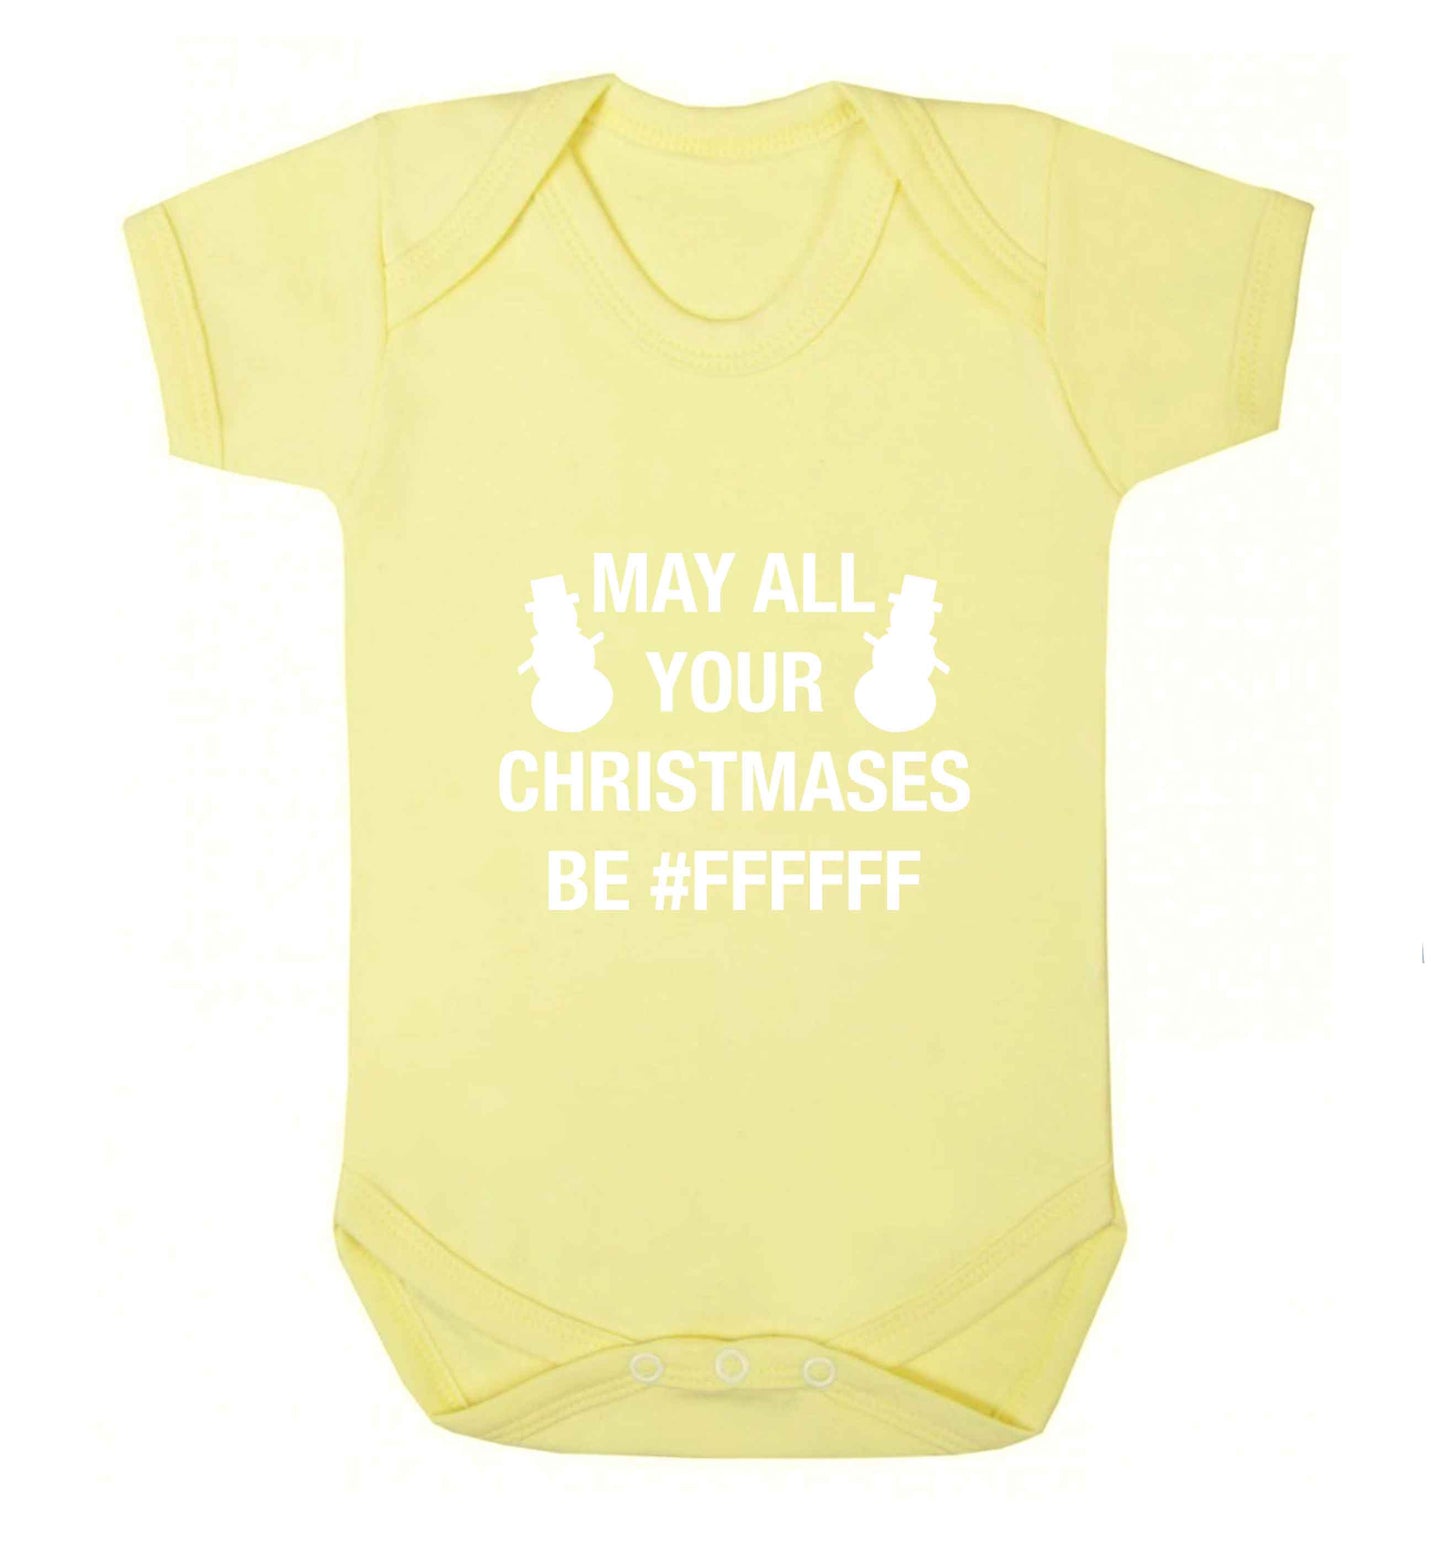 May all your Christmases be #FFFFFF baby vest pale yellow 18-24 months